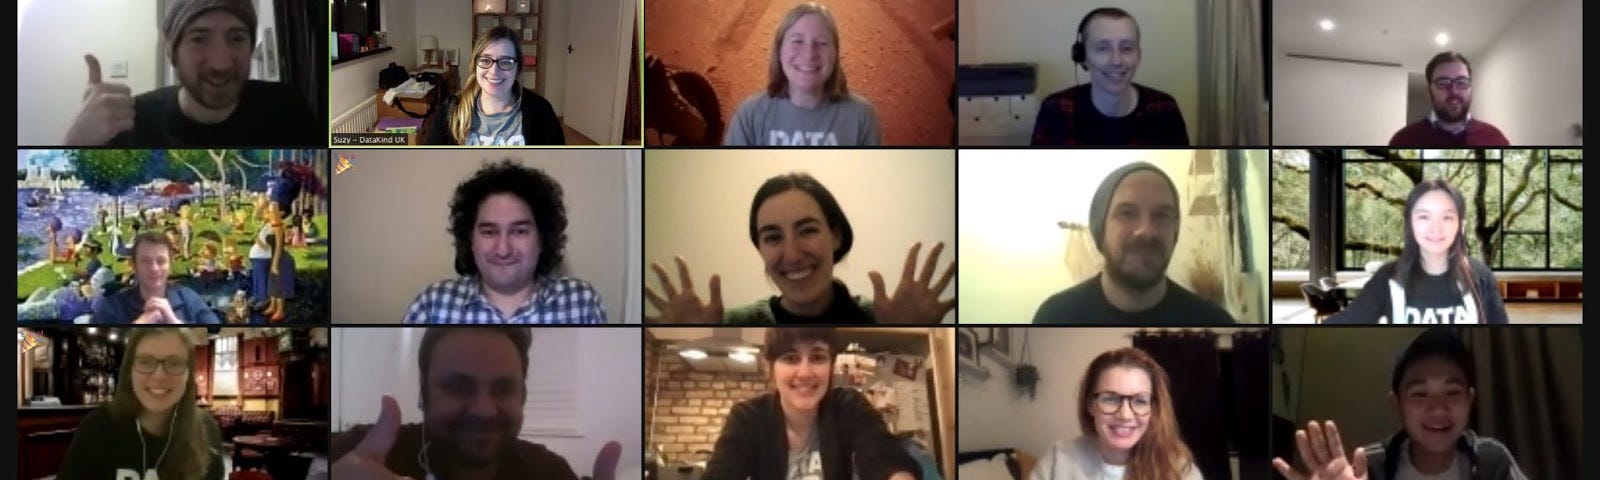 Screenshot of a Zoom video call with 20 casually dressed, smiling adults